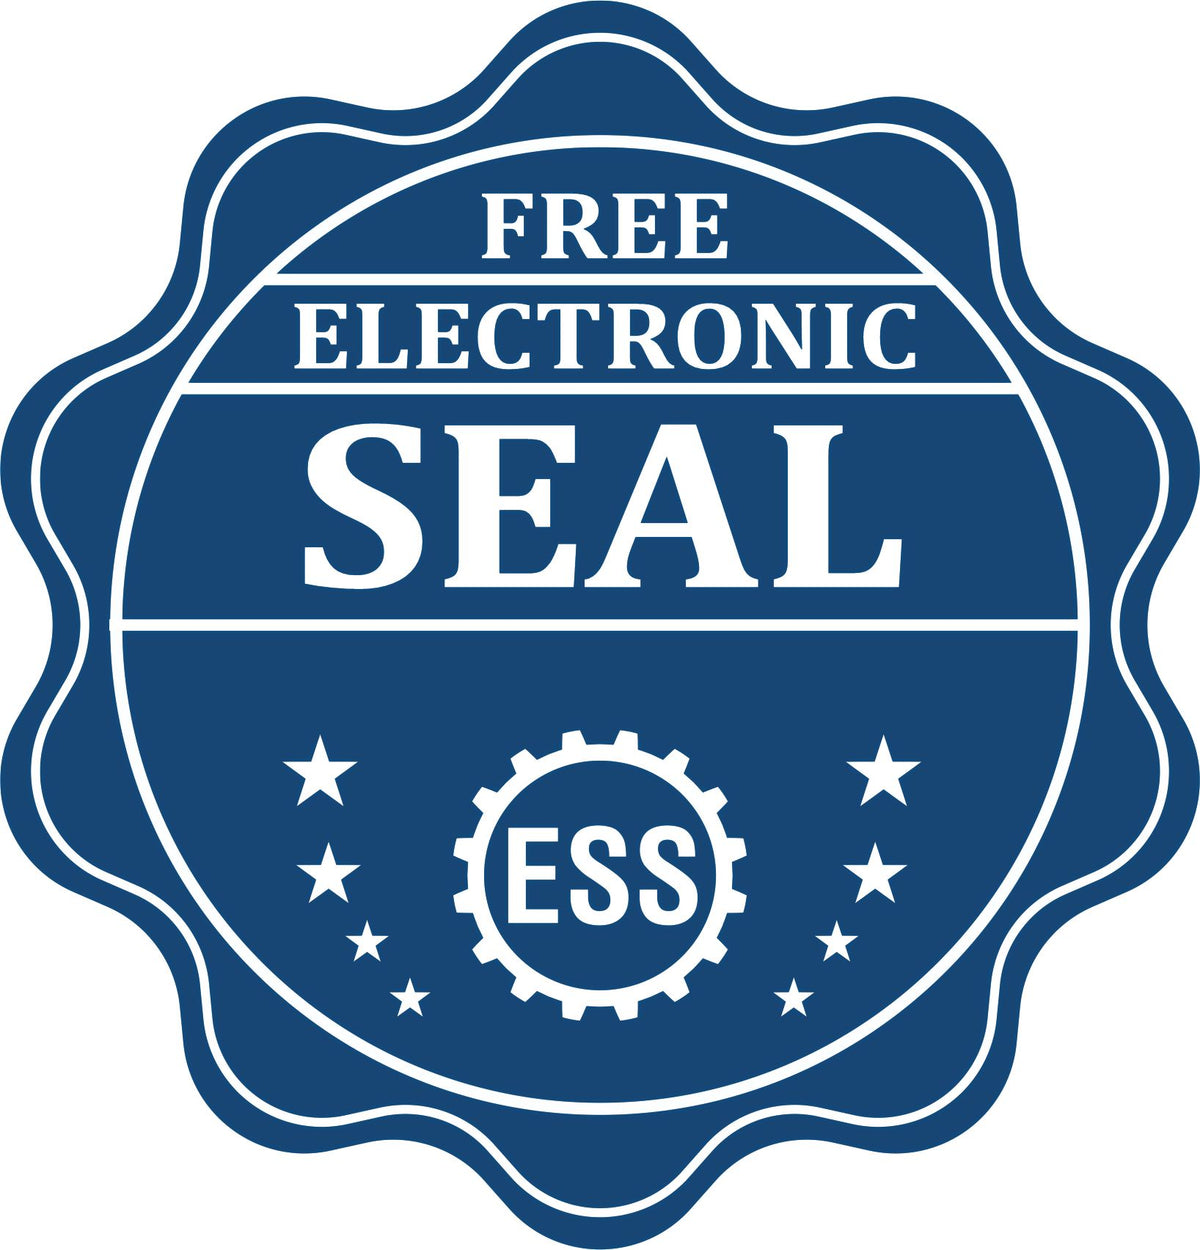 A badge showing a free electronic seal for the Handheld Minnesota Land Surveyor Seal with stars and the ESS gear on the emblem.